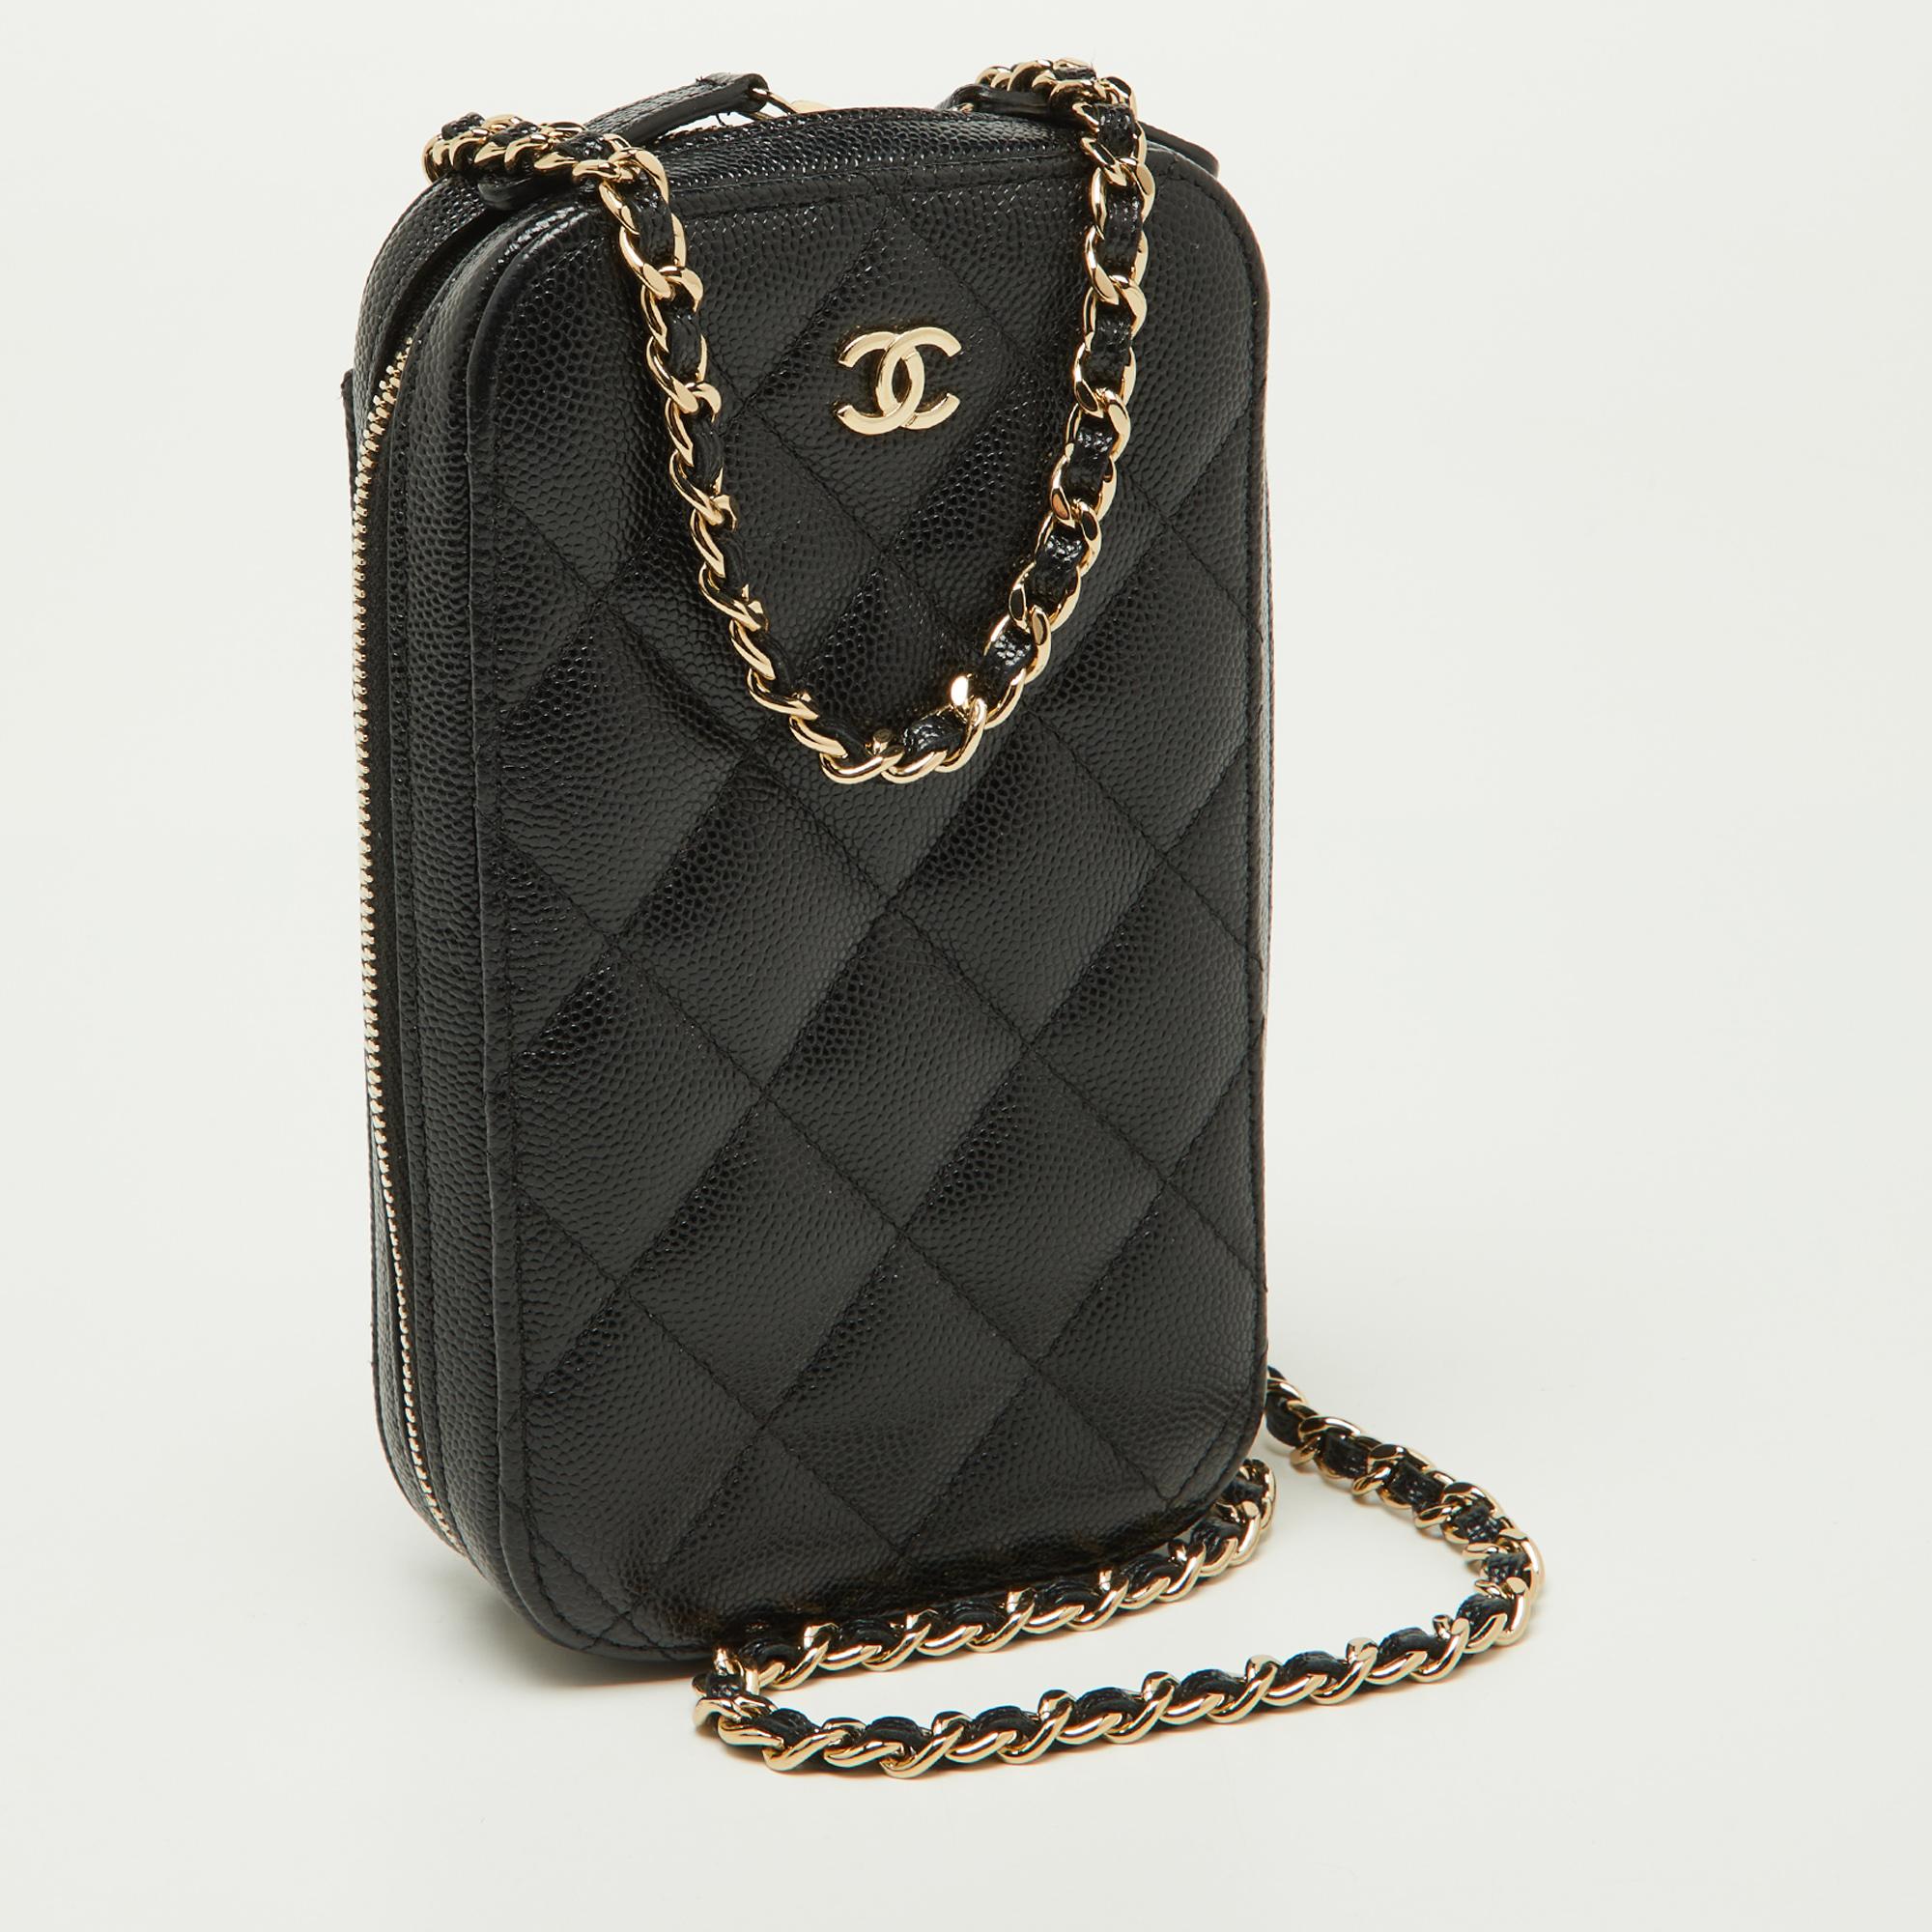 Women's Chanel Black Quilted Caviar Leather Phone Holder Crossbody Bag